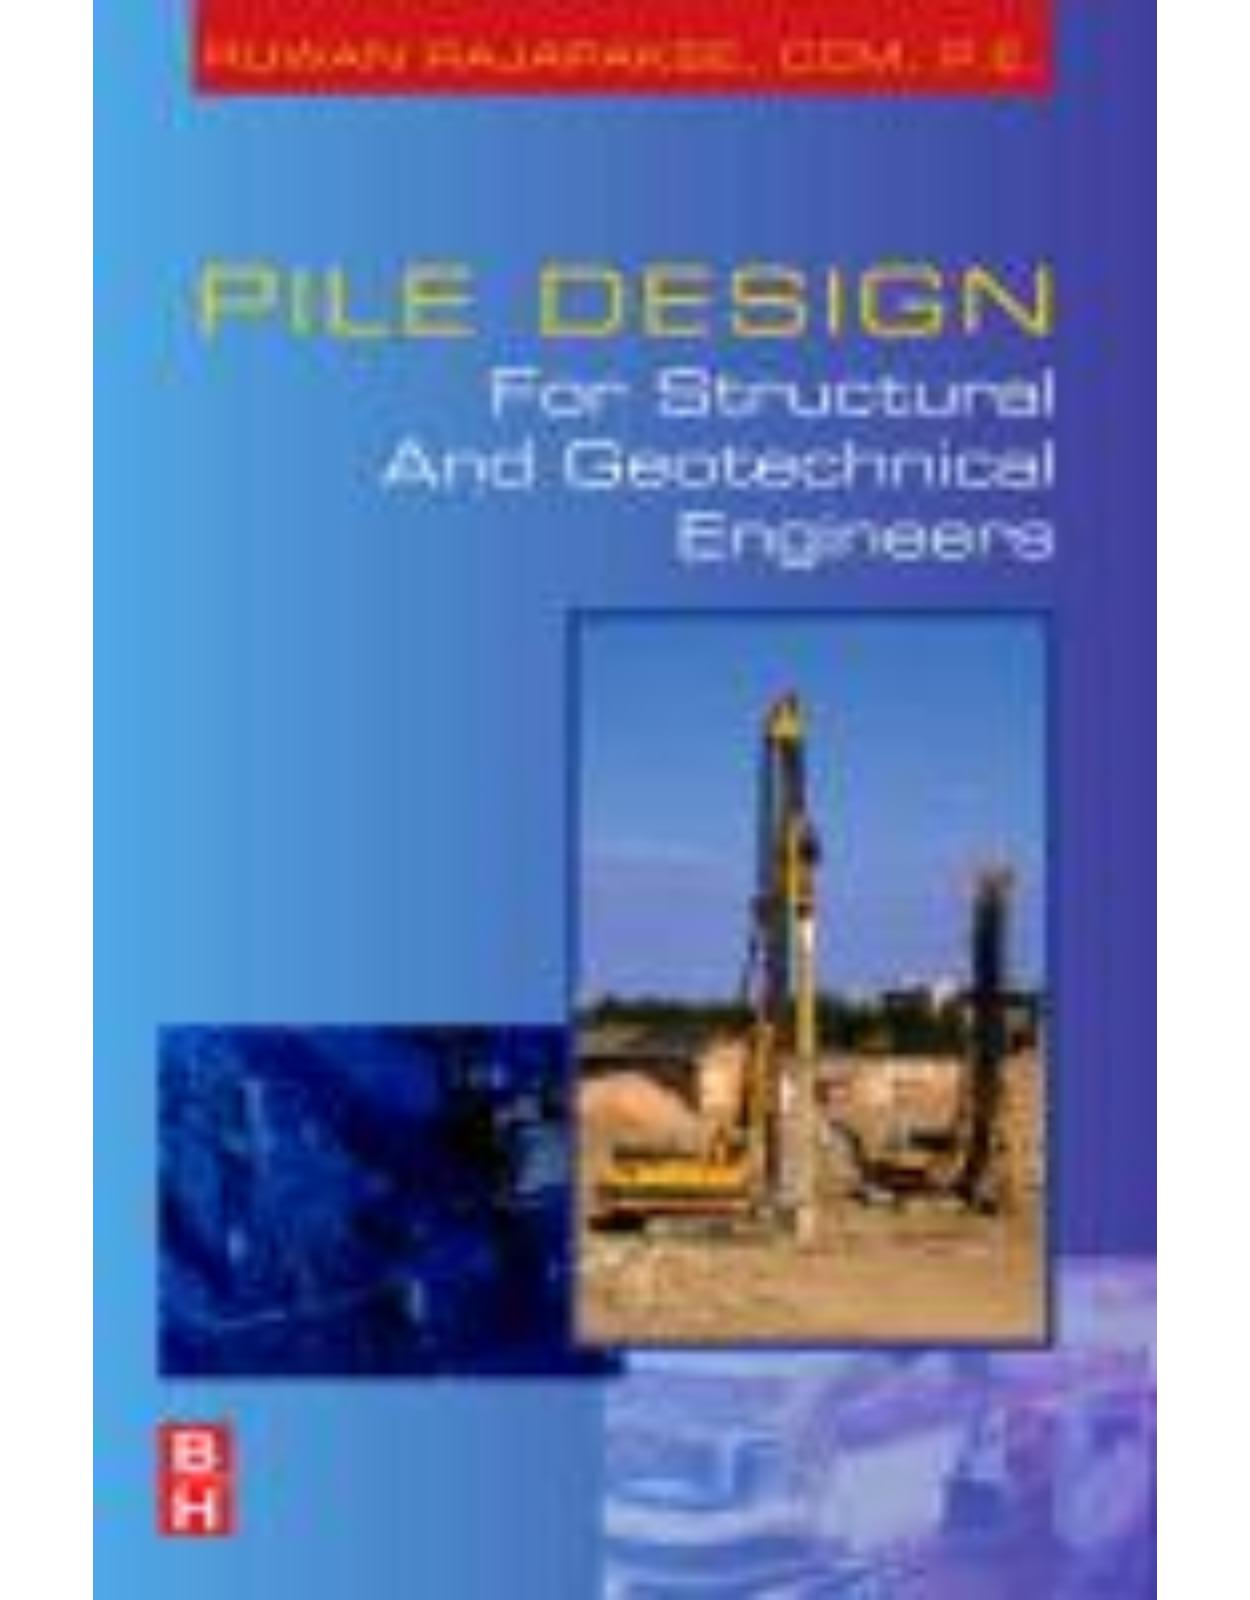 Pile Design and Construction Rules of Thumb